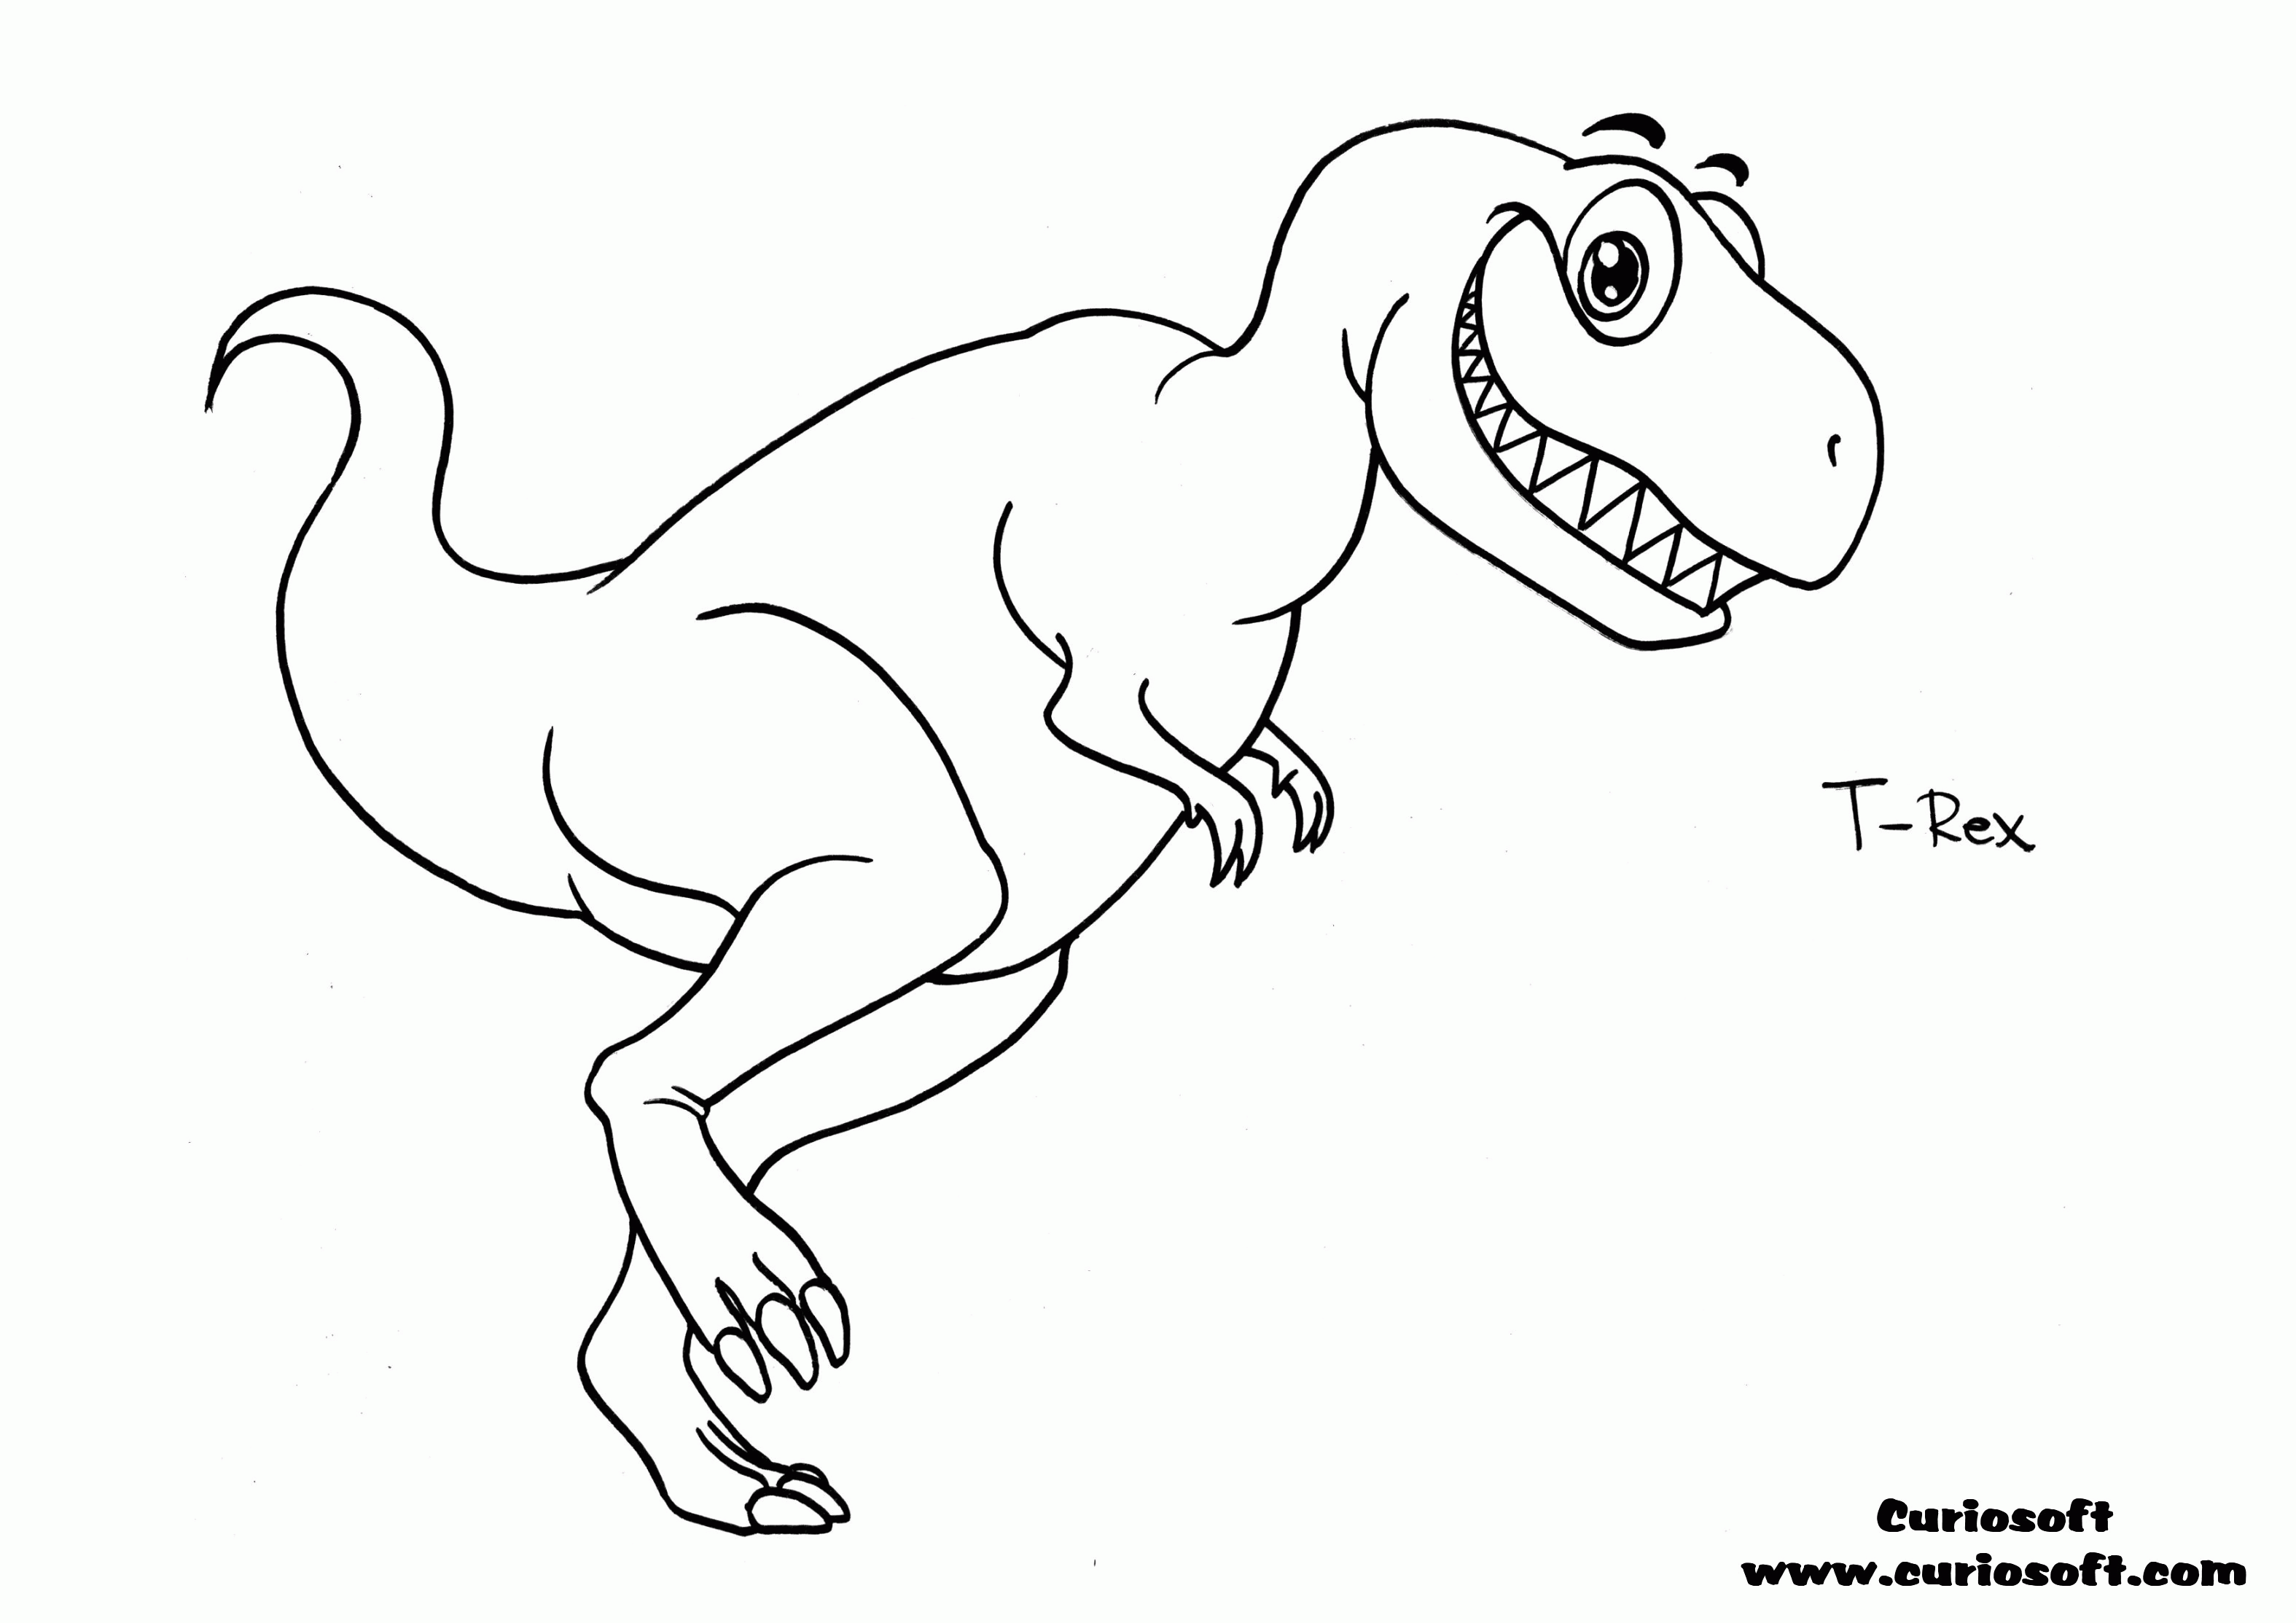 tyrannosaurus rex coloring page | High Quality Coloring Pages